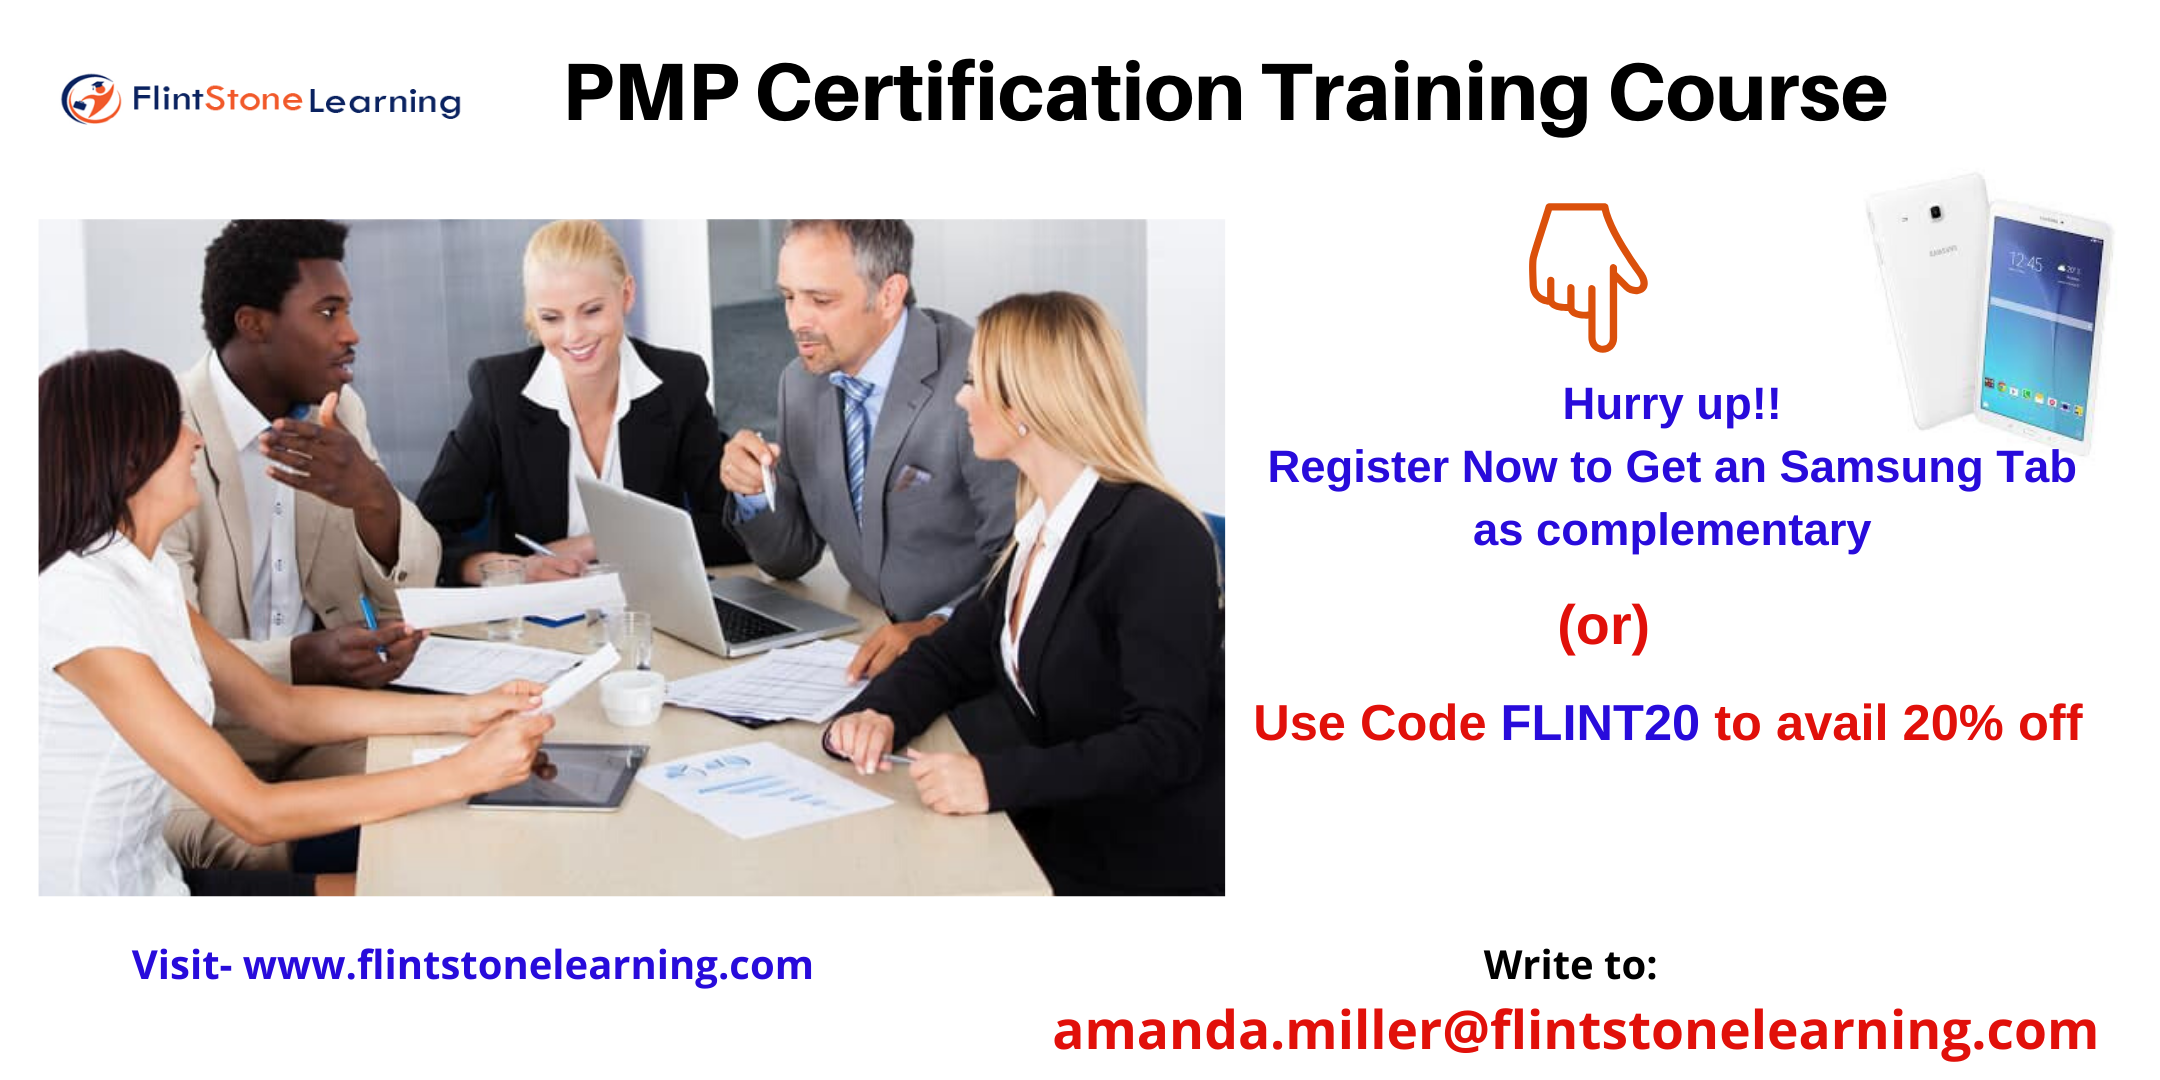 PMP Training workshop in Cardiff-by-the-Sea, CA